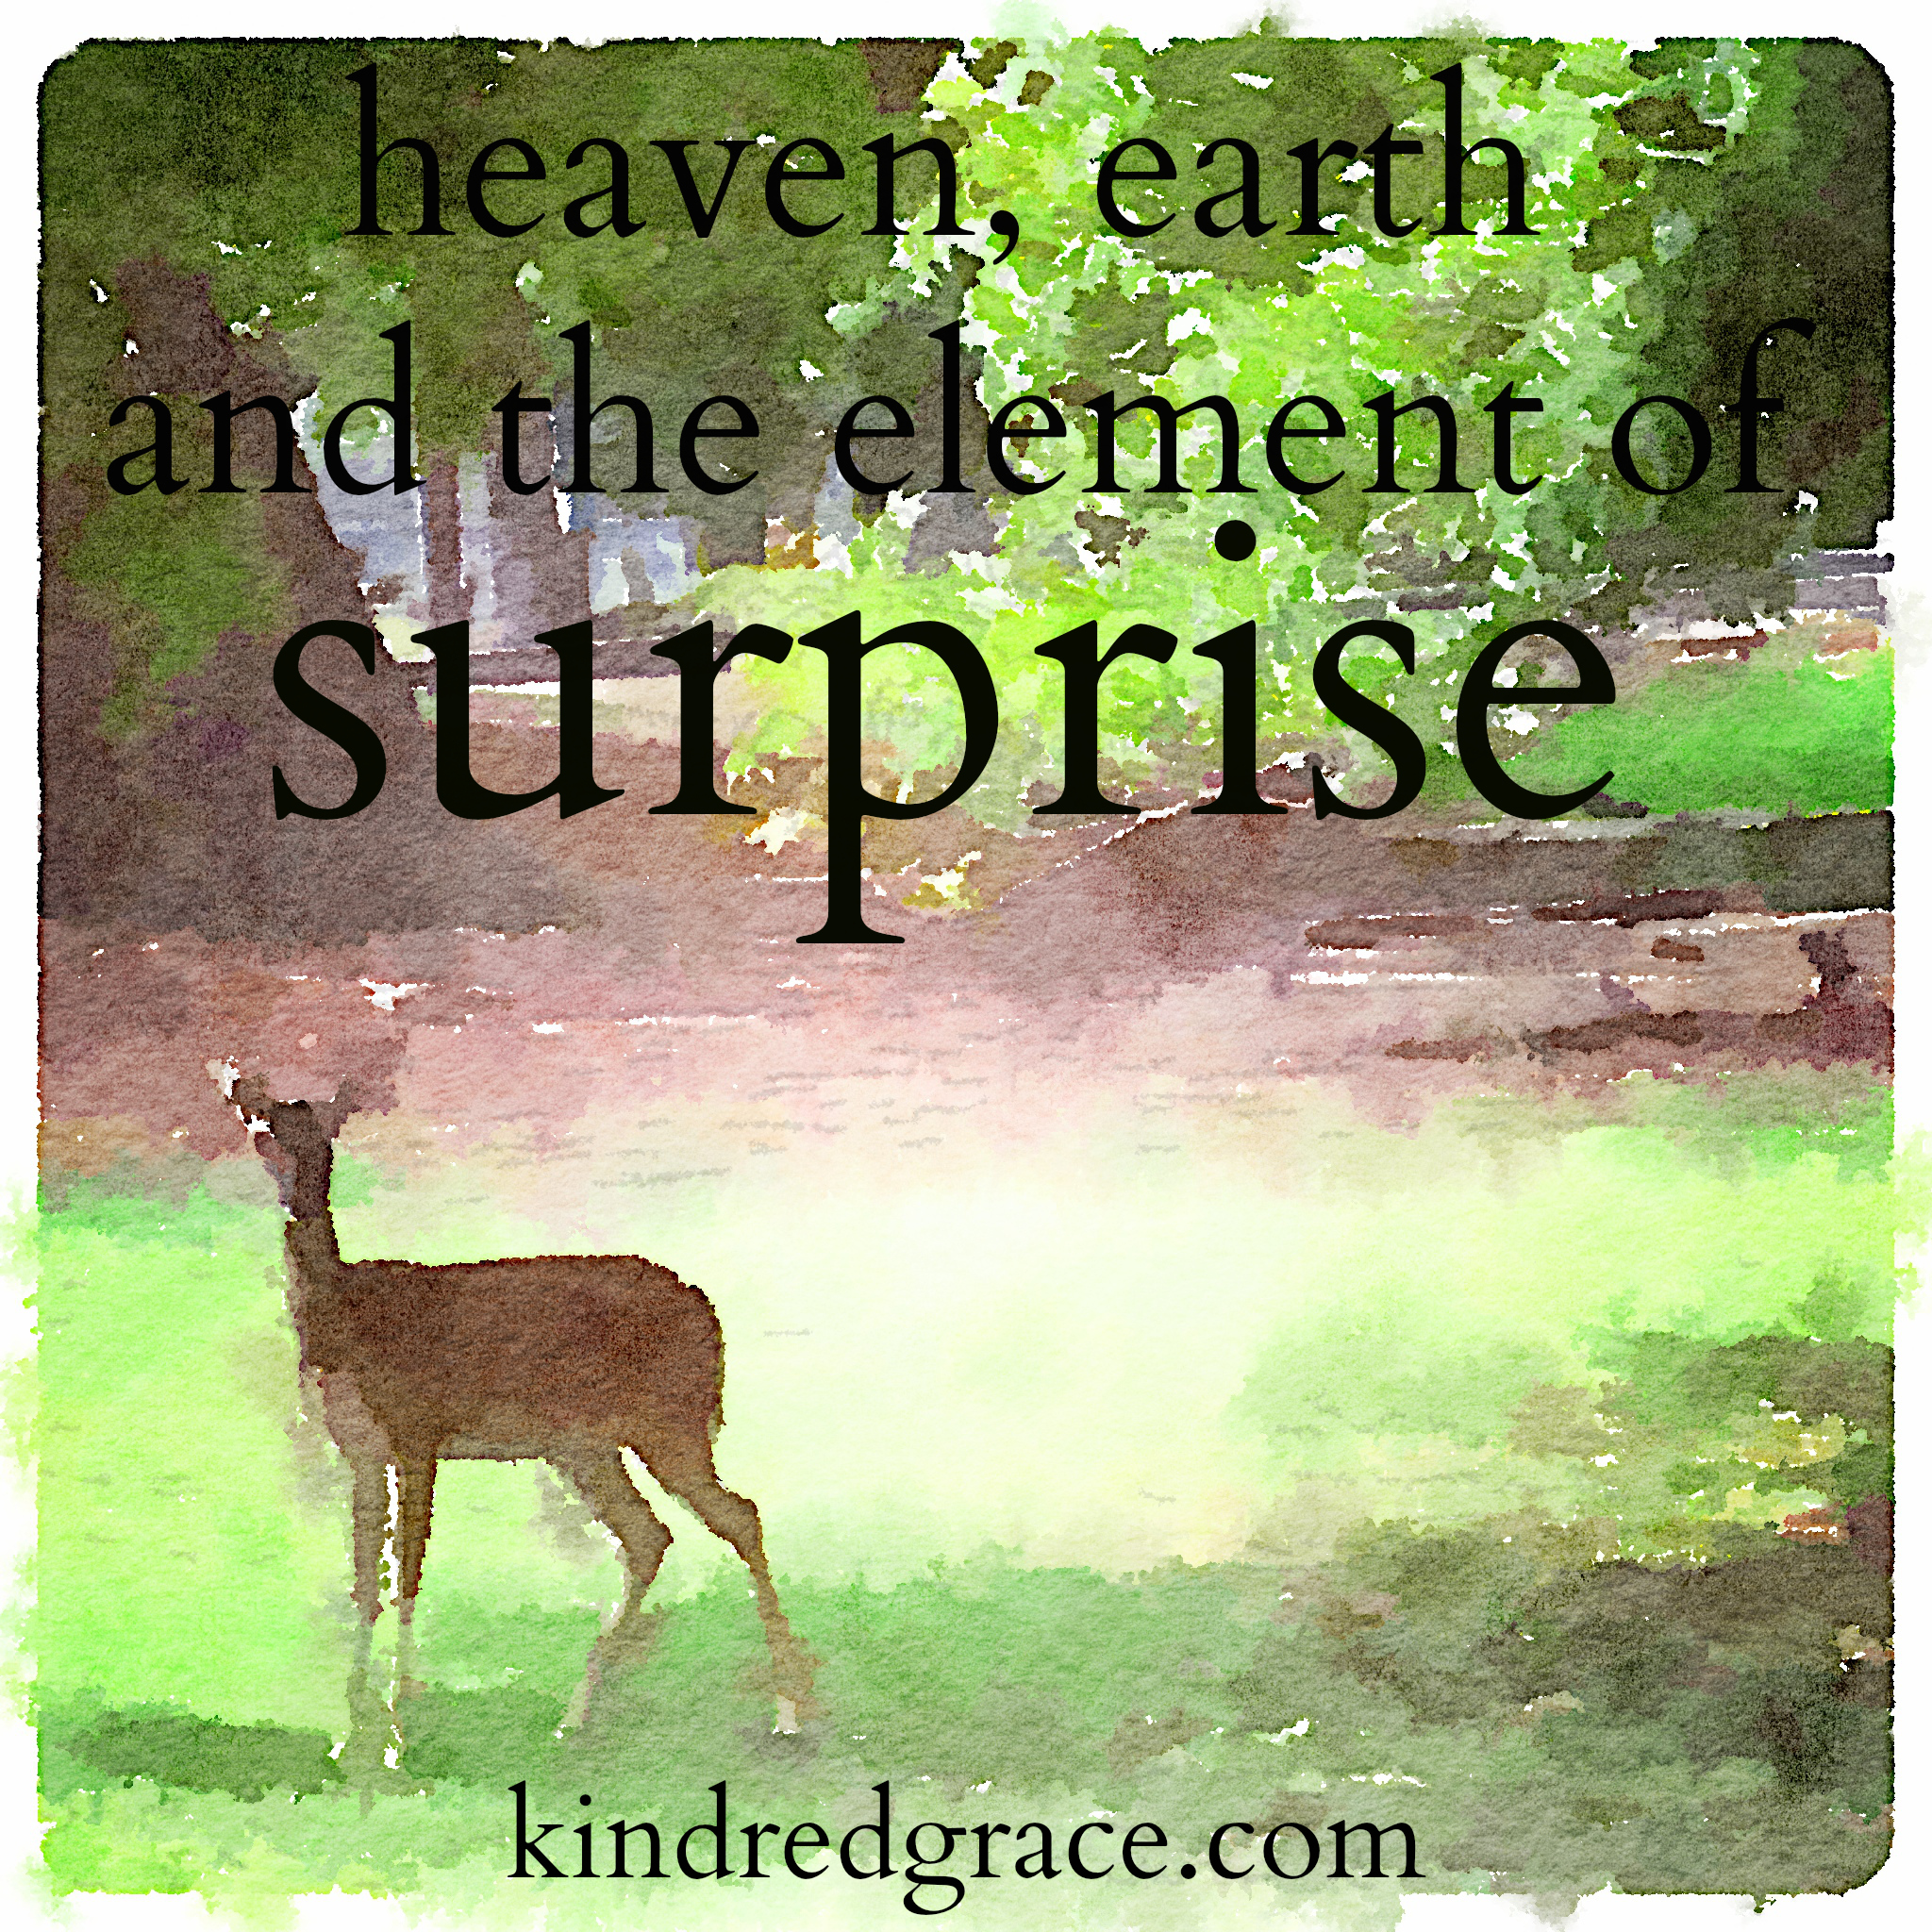 heaven, earth and the element of surprise